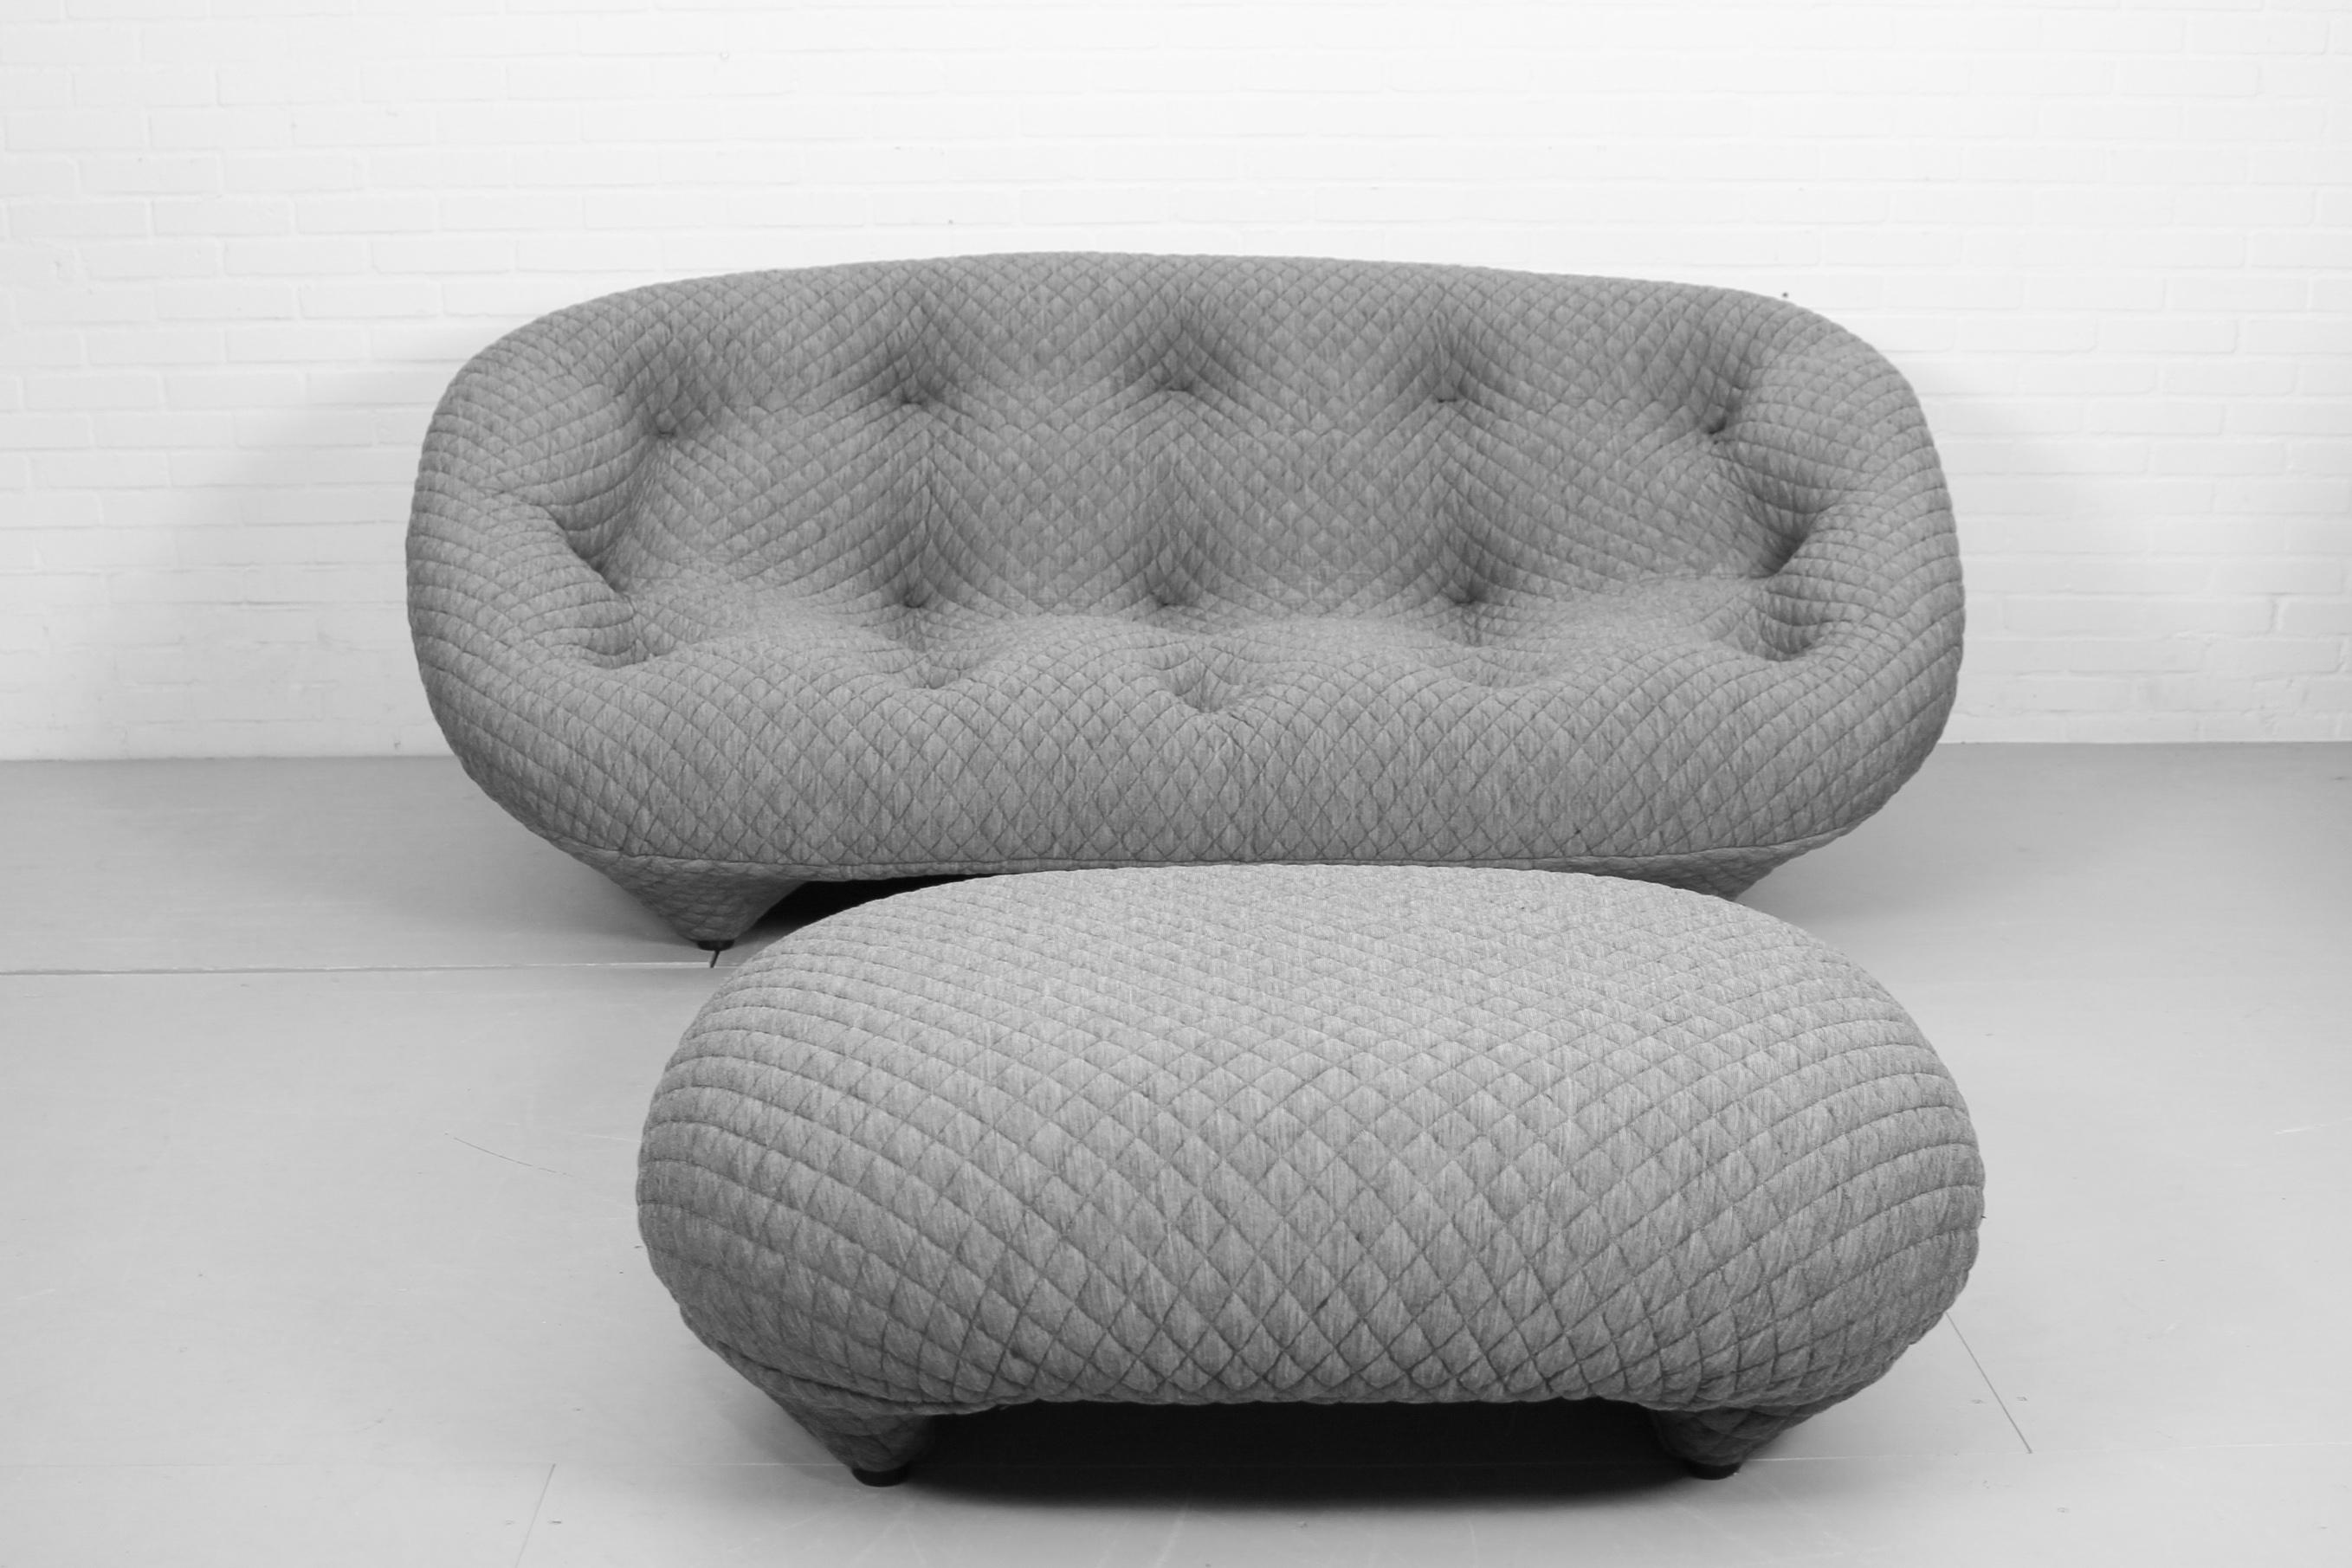 A “Ploum” sofa and matching ottoman designed by Ronan and Erwan Bouroullec for Ligne Roset. The sofa is covered with the stretchable Kvadrat Febrik Cross. The sofa is in very good condition without any signs of use and provides extreme comfort.